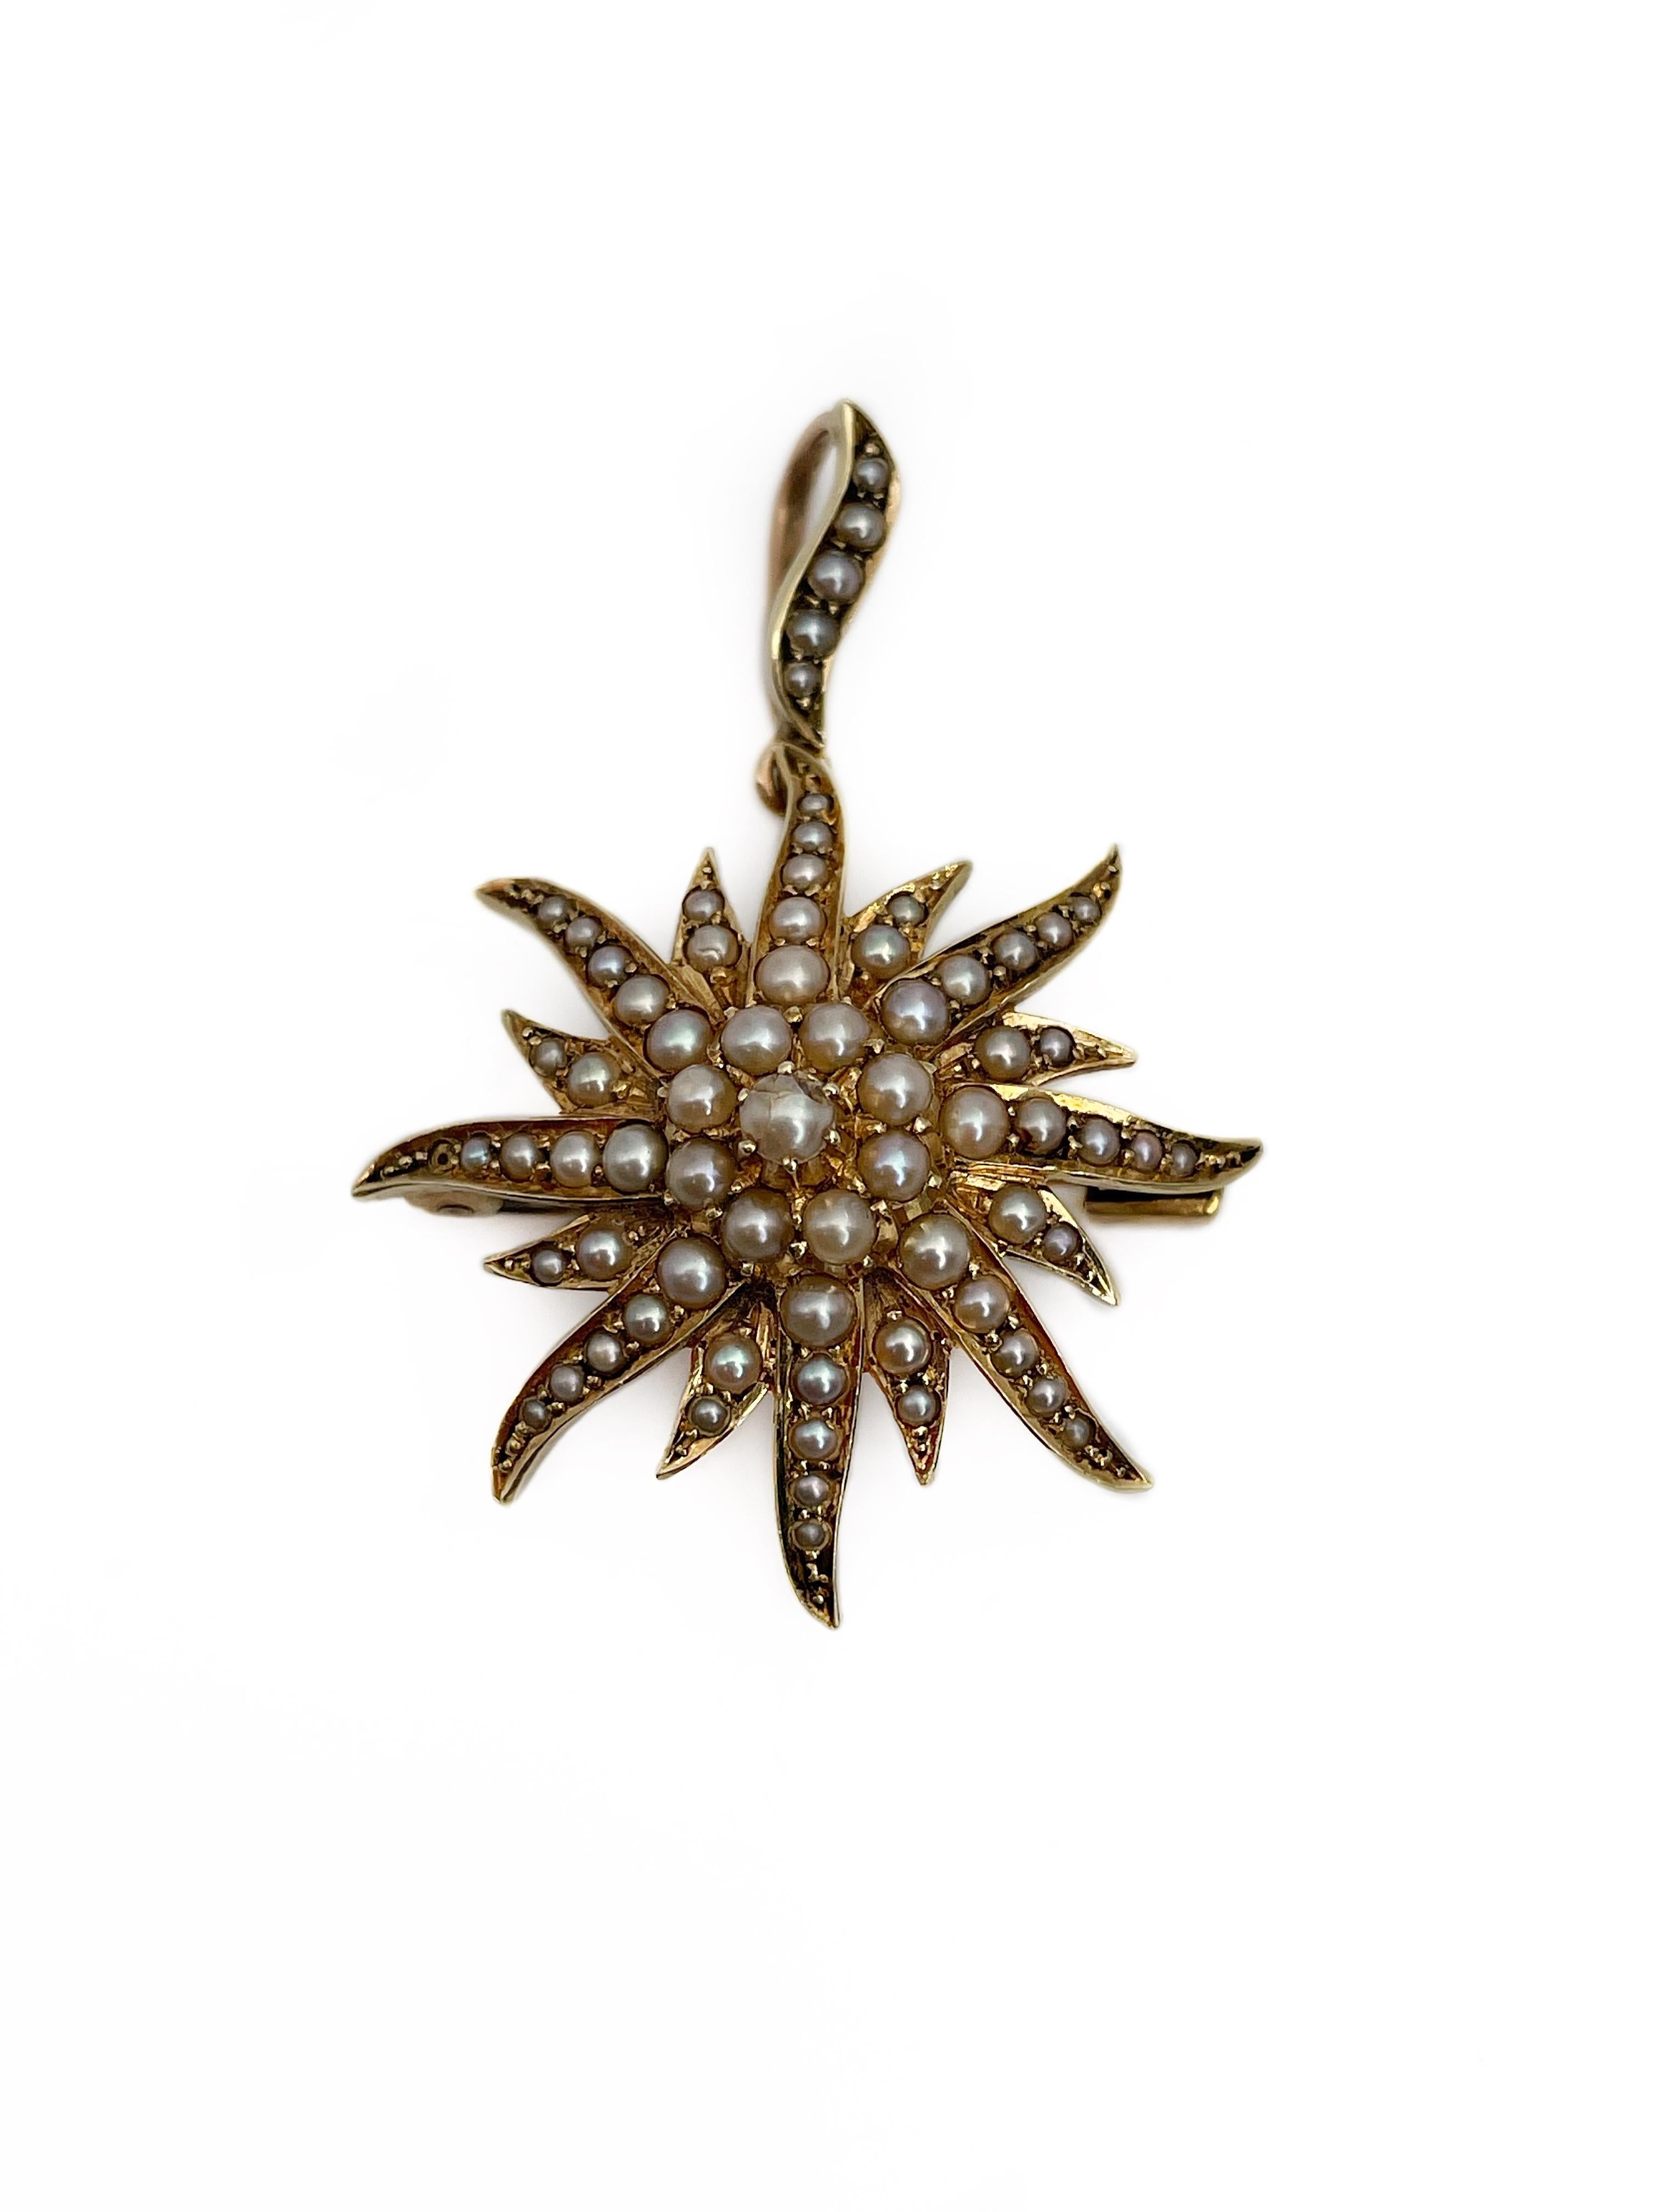 This is a lovely Victorian starburst pendant brooch crafted in 15K gold. The piece features seed pearls. One of them is missing and central has small cracks.

Weight: 5.27g
Length: 4cm
Width: 3cm